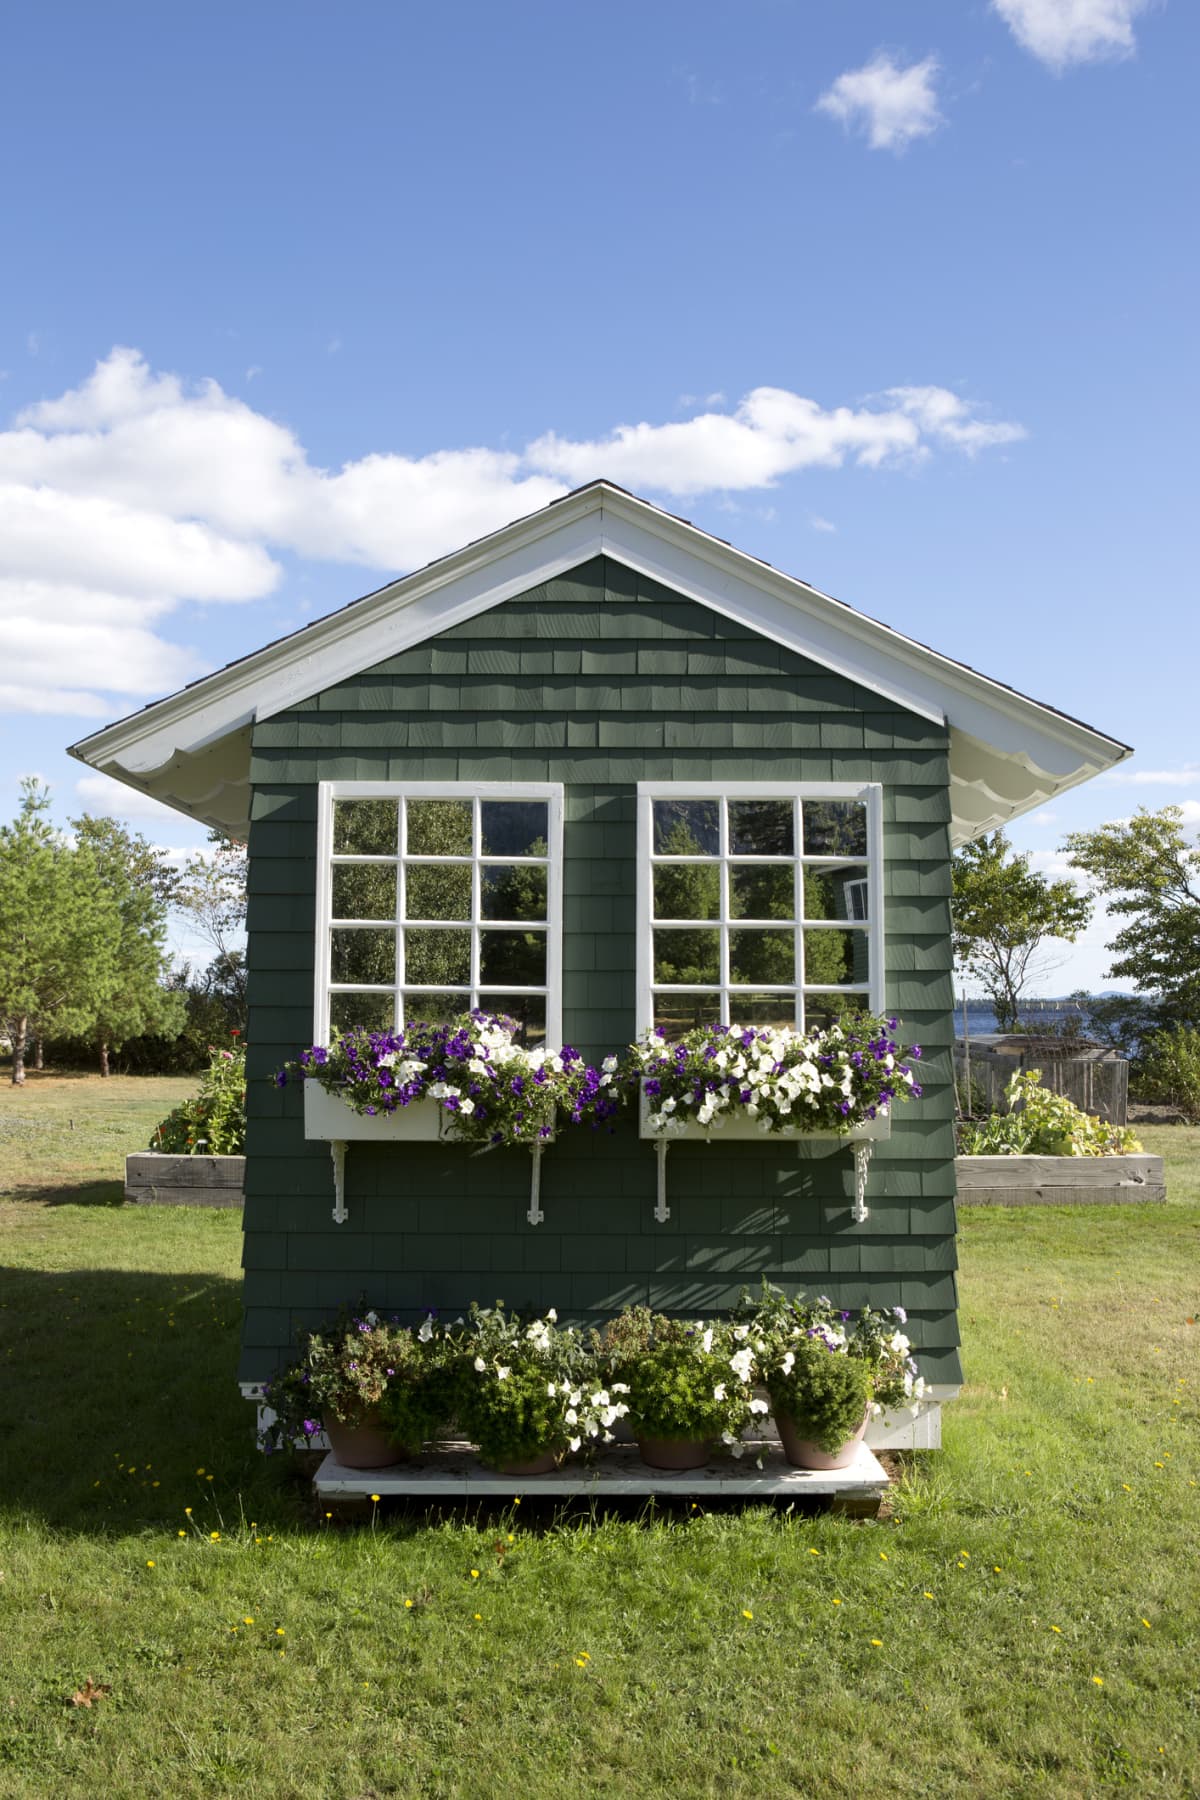 An outdoor shed